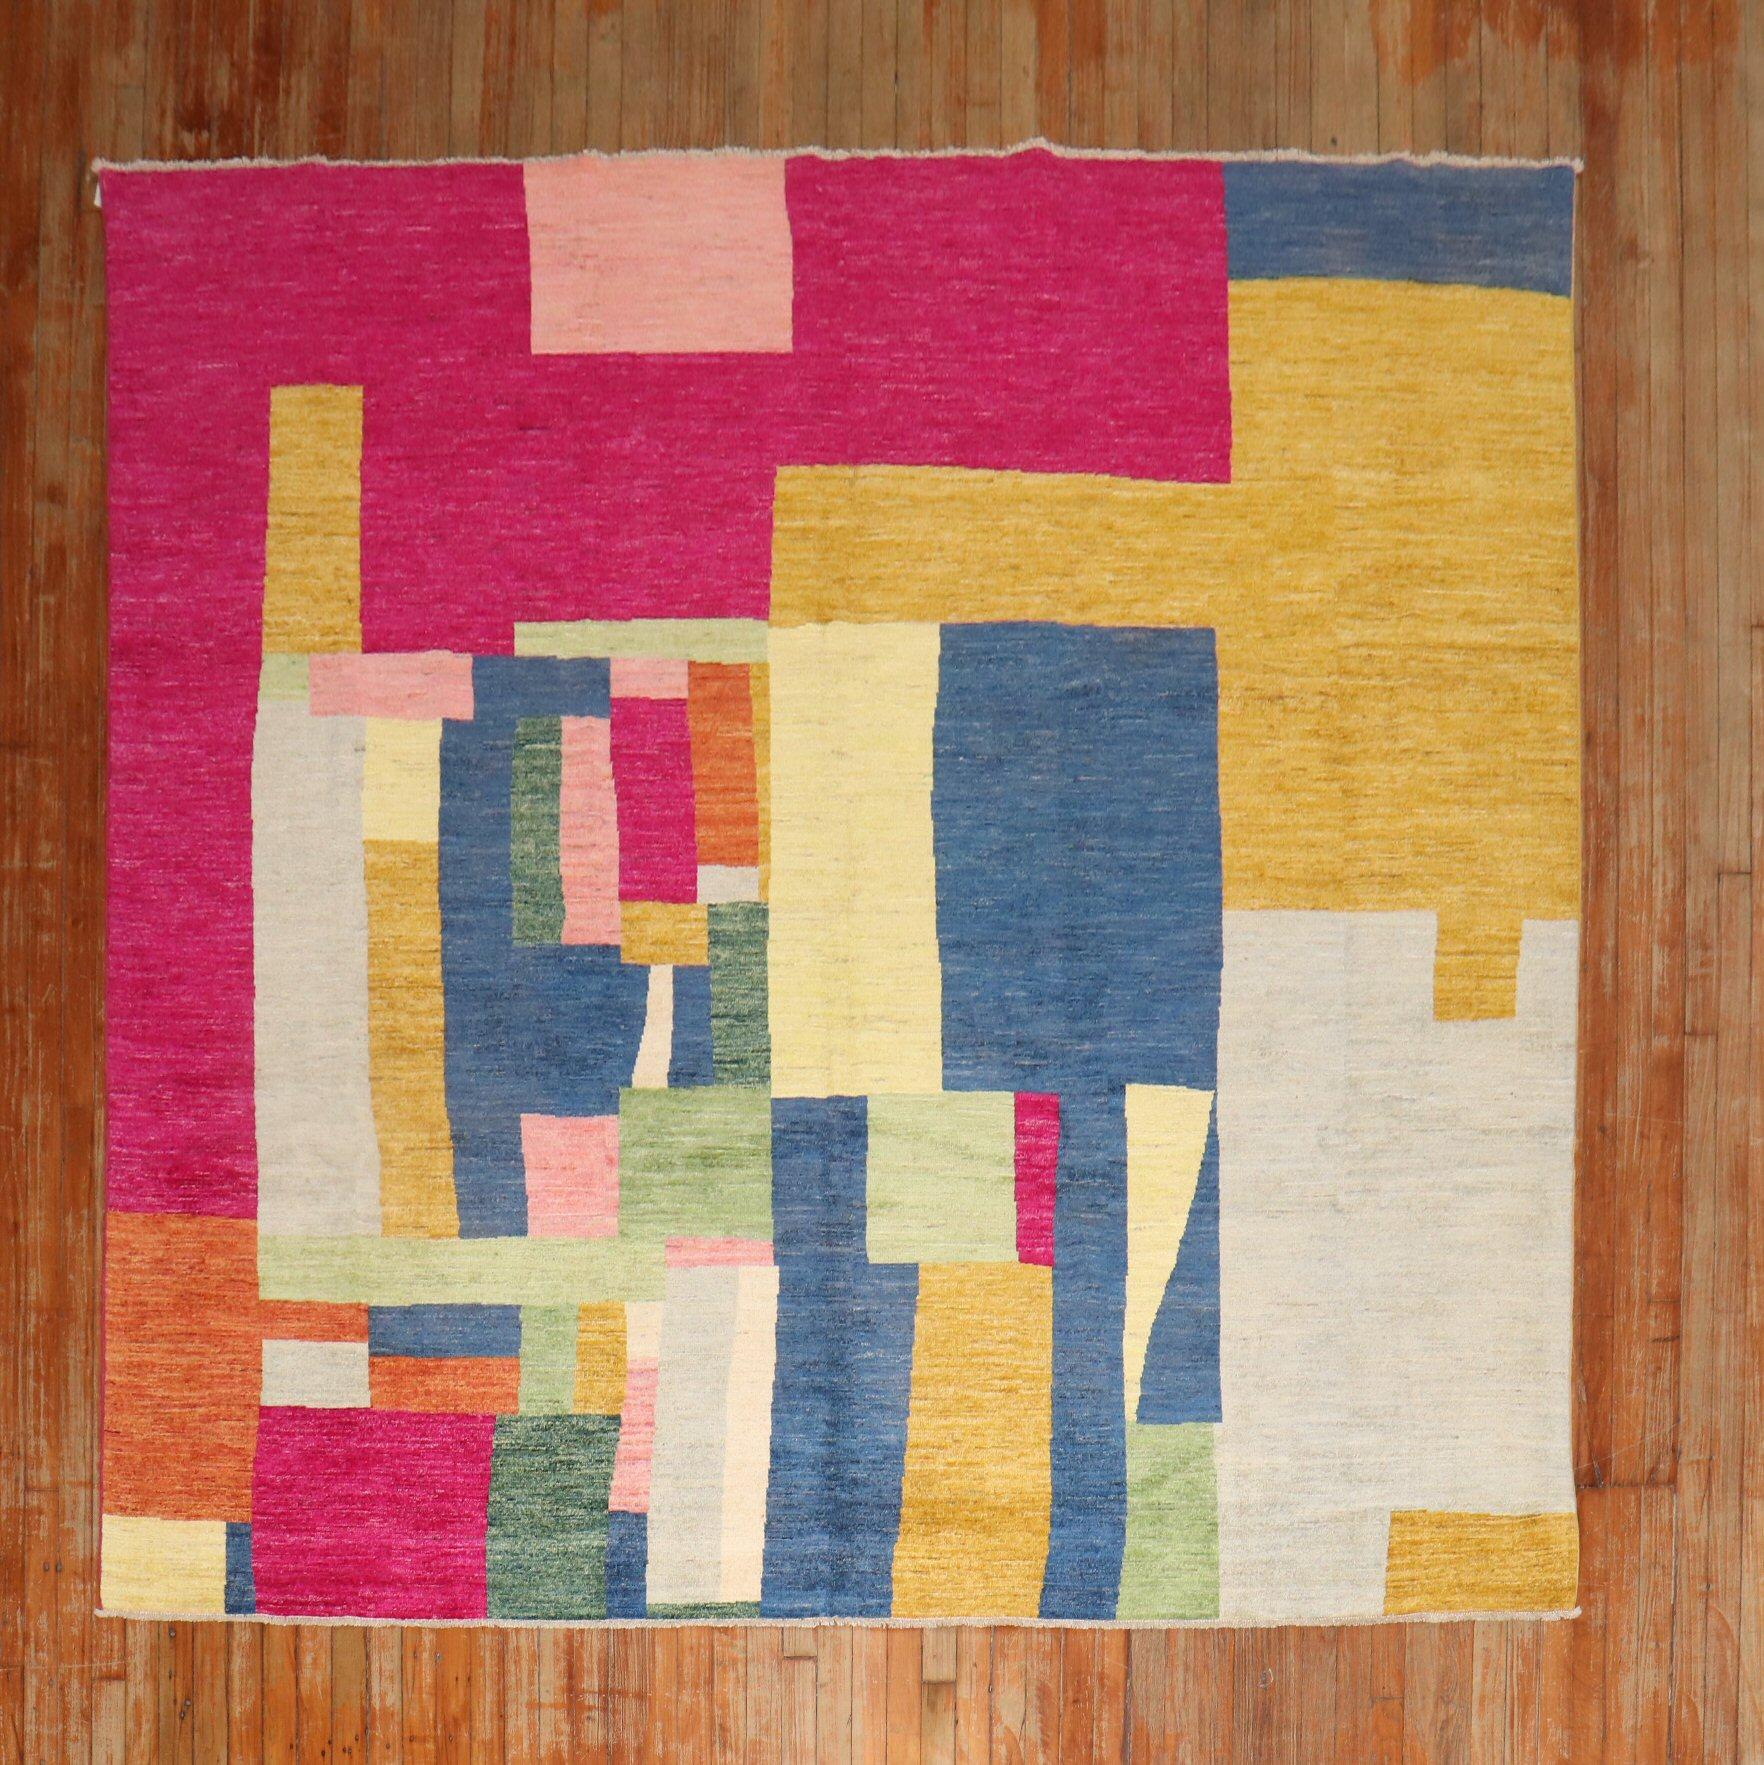 21st century square one of a kind Afghan contemporary rug with a colorful abstract design.

Measures:8.2